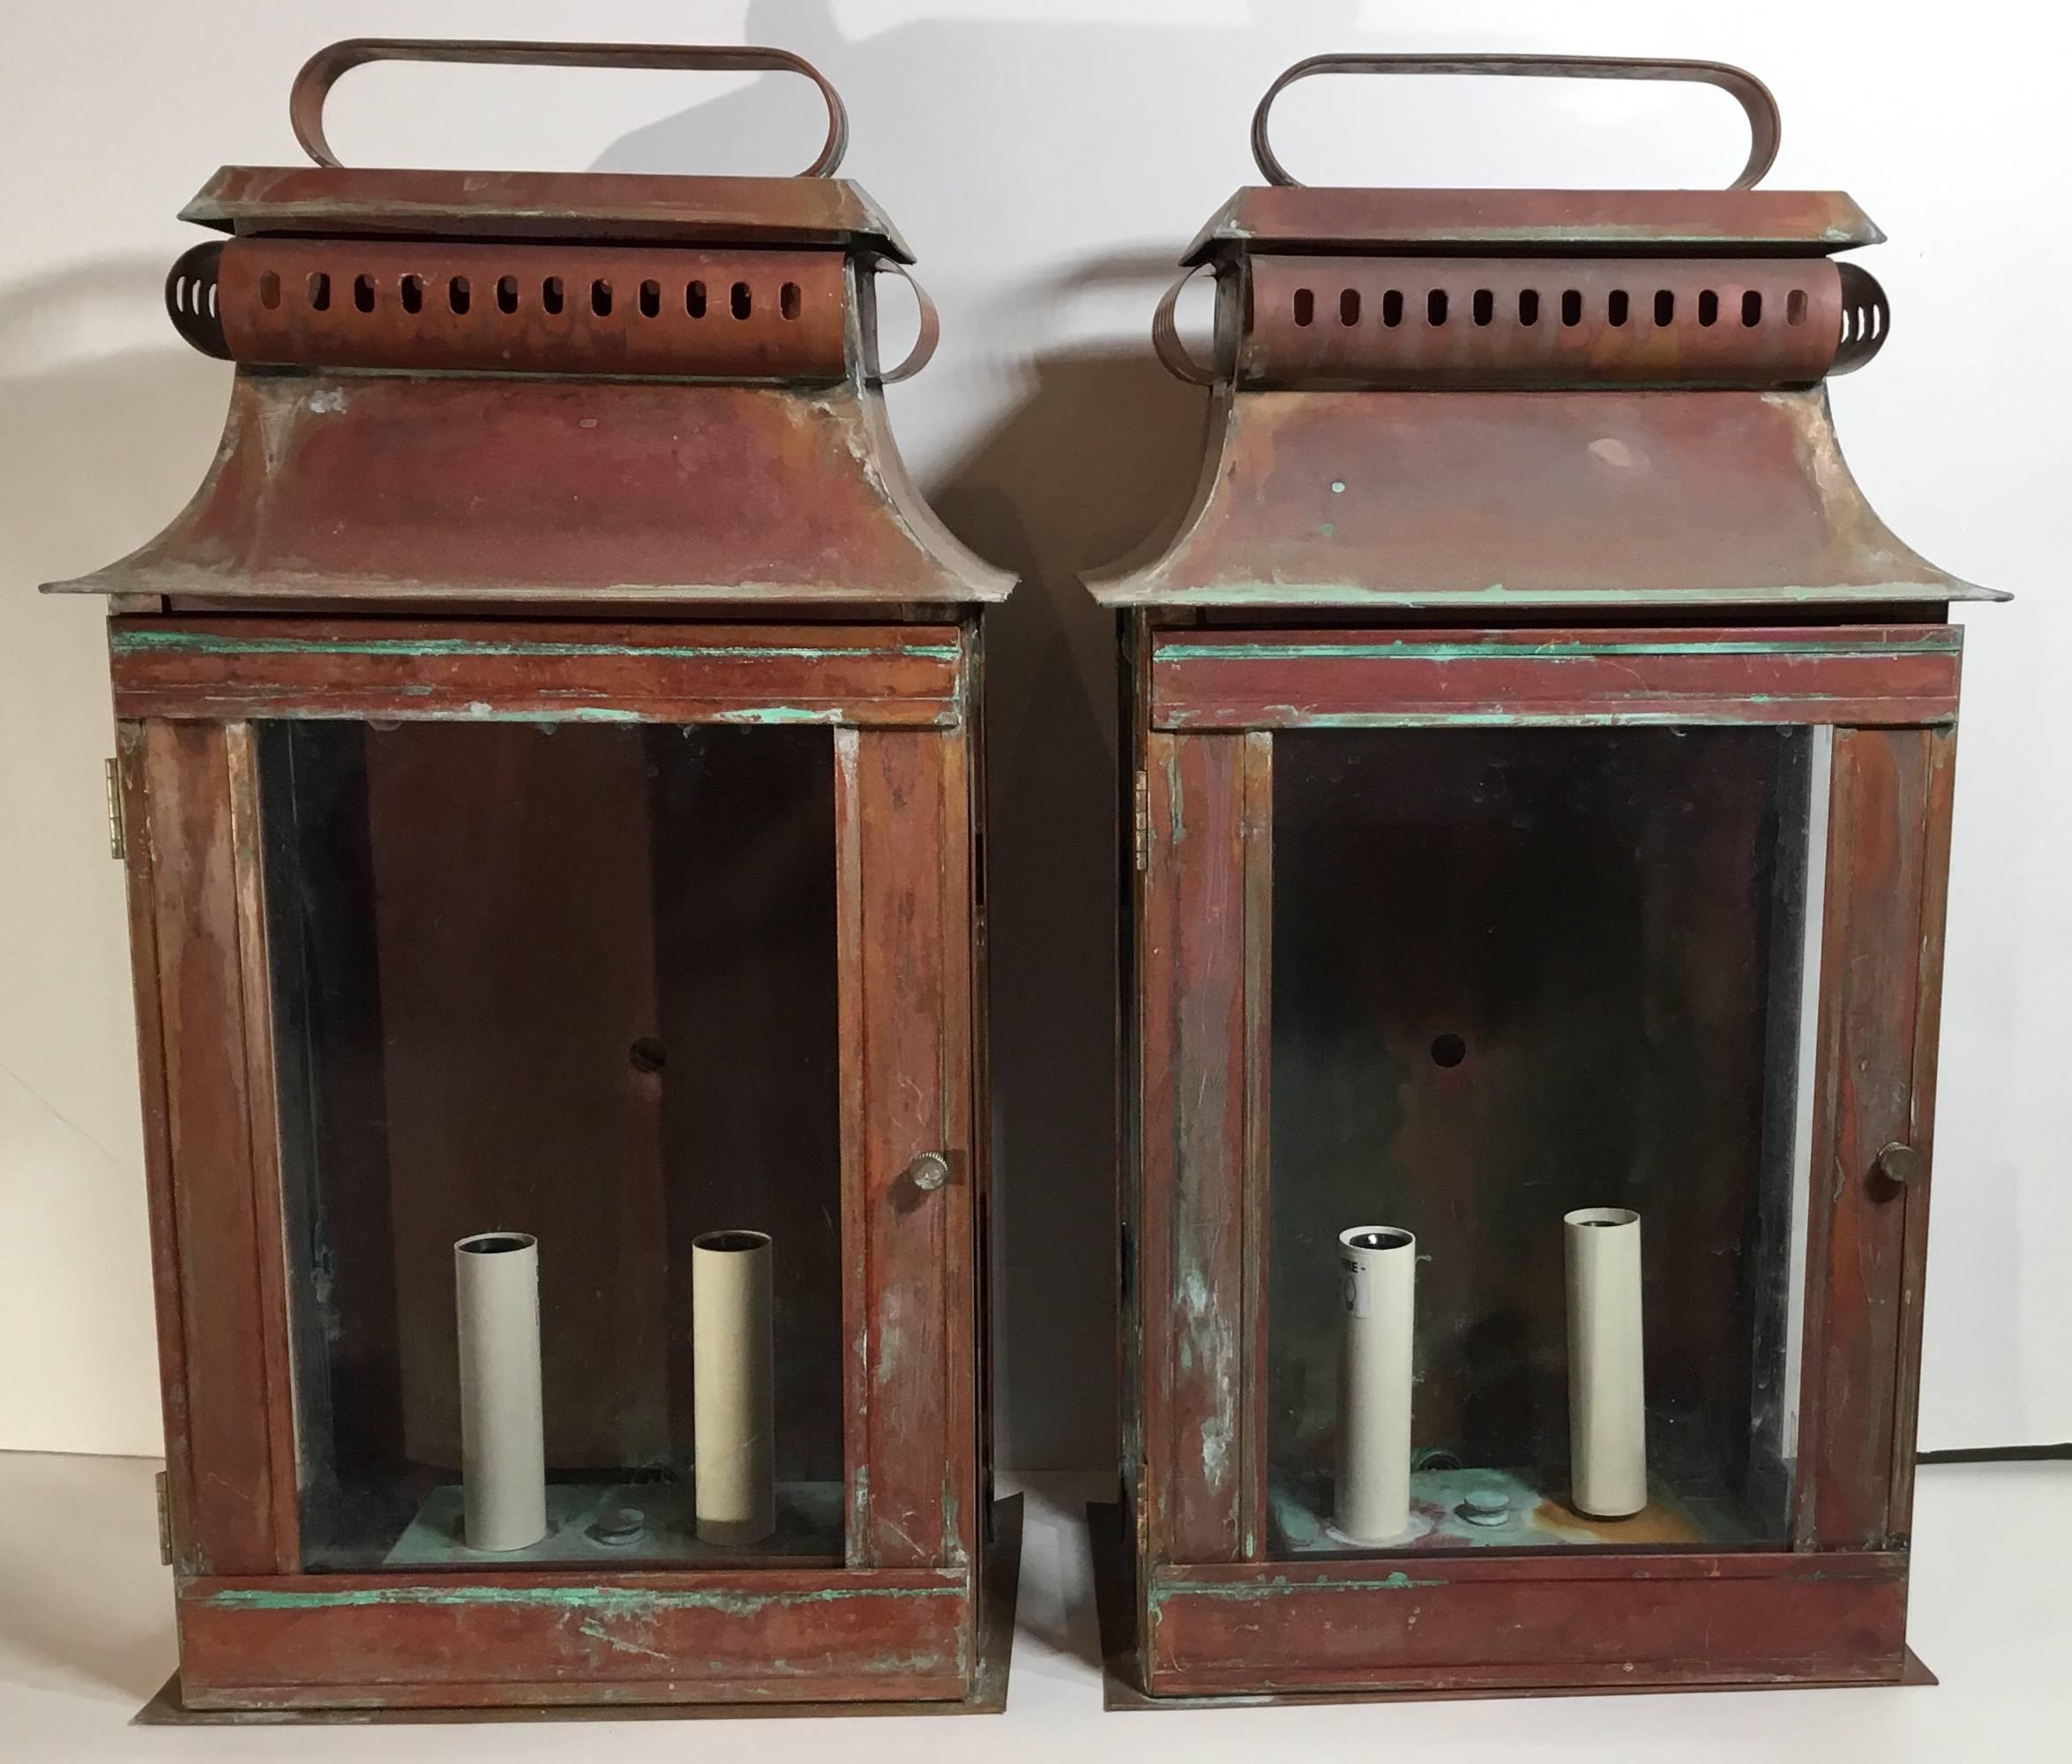 Pair of Architectural wall lantern made of copper, with two 60/watt light each electrified and ready to use. Suitable for wet locations, UL approved up to US code.